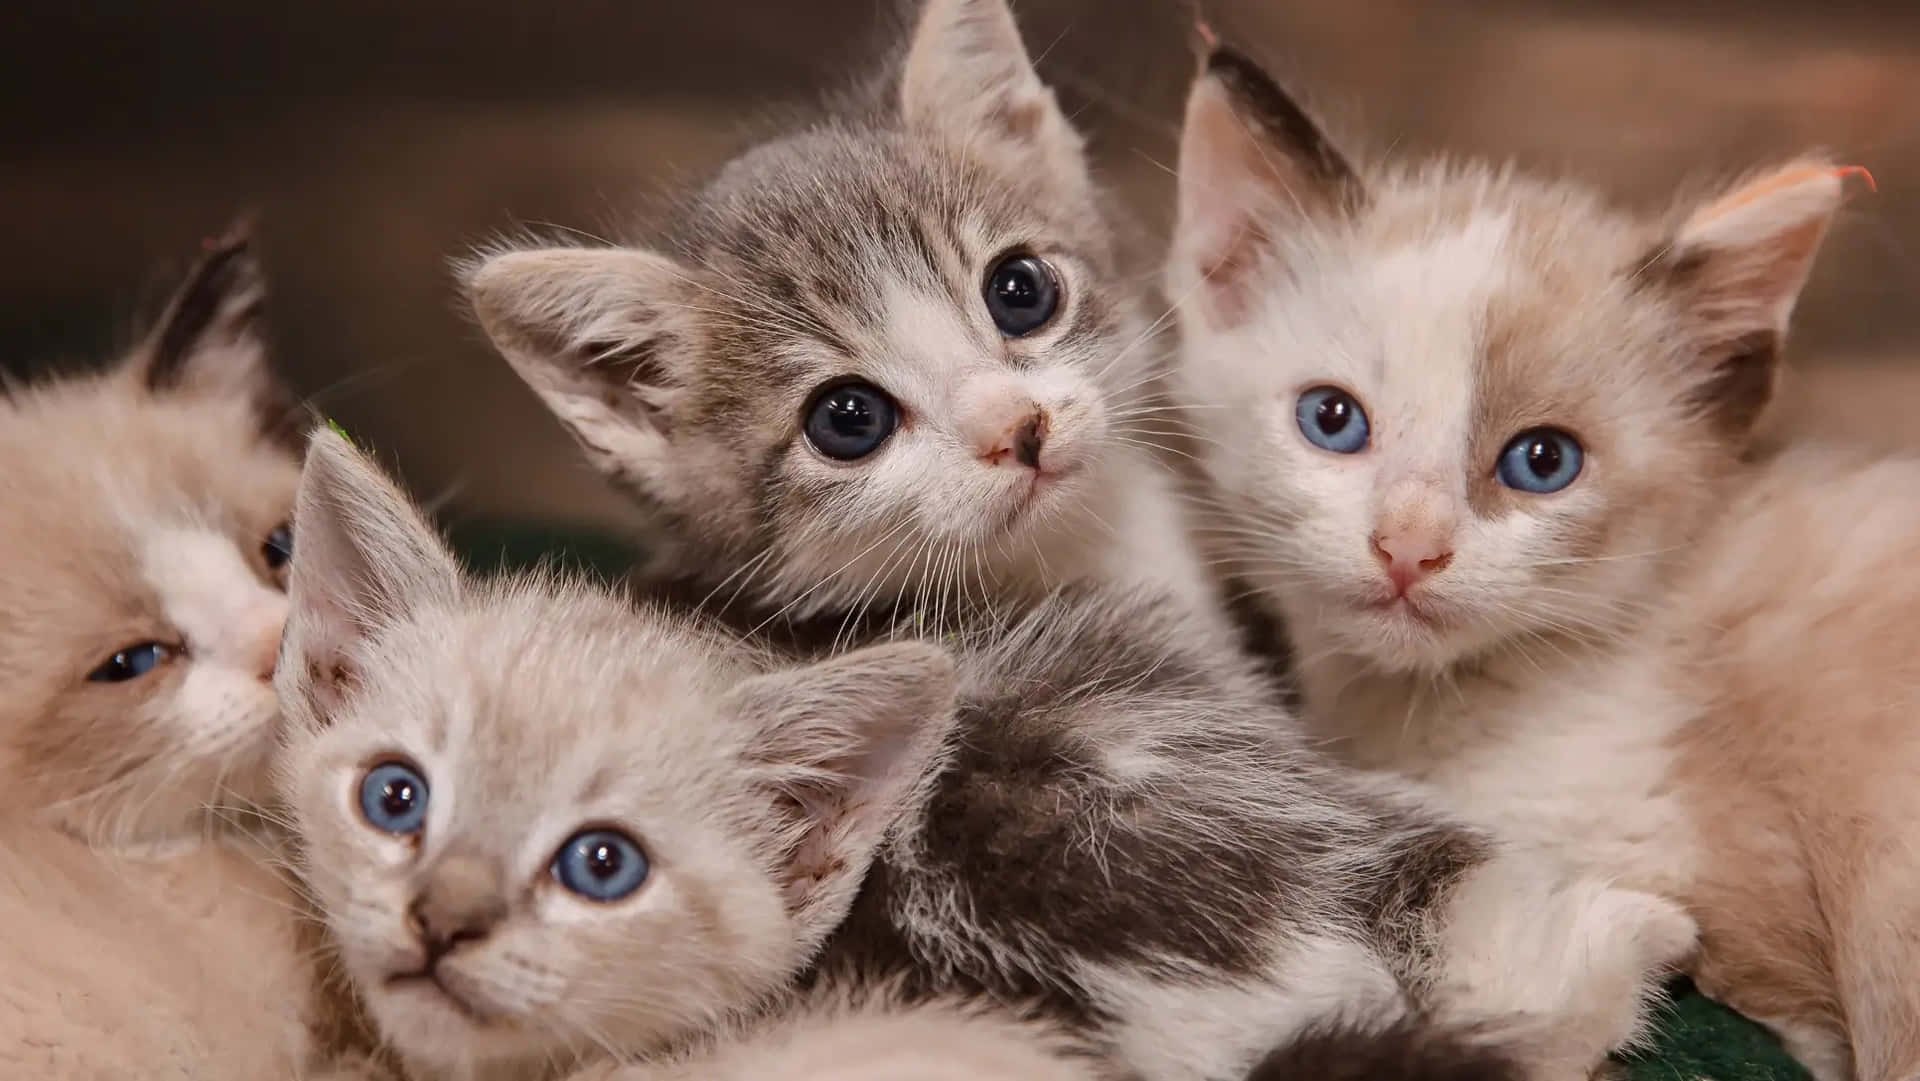 "These two little kittens are sure to make you purr"